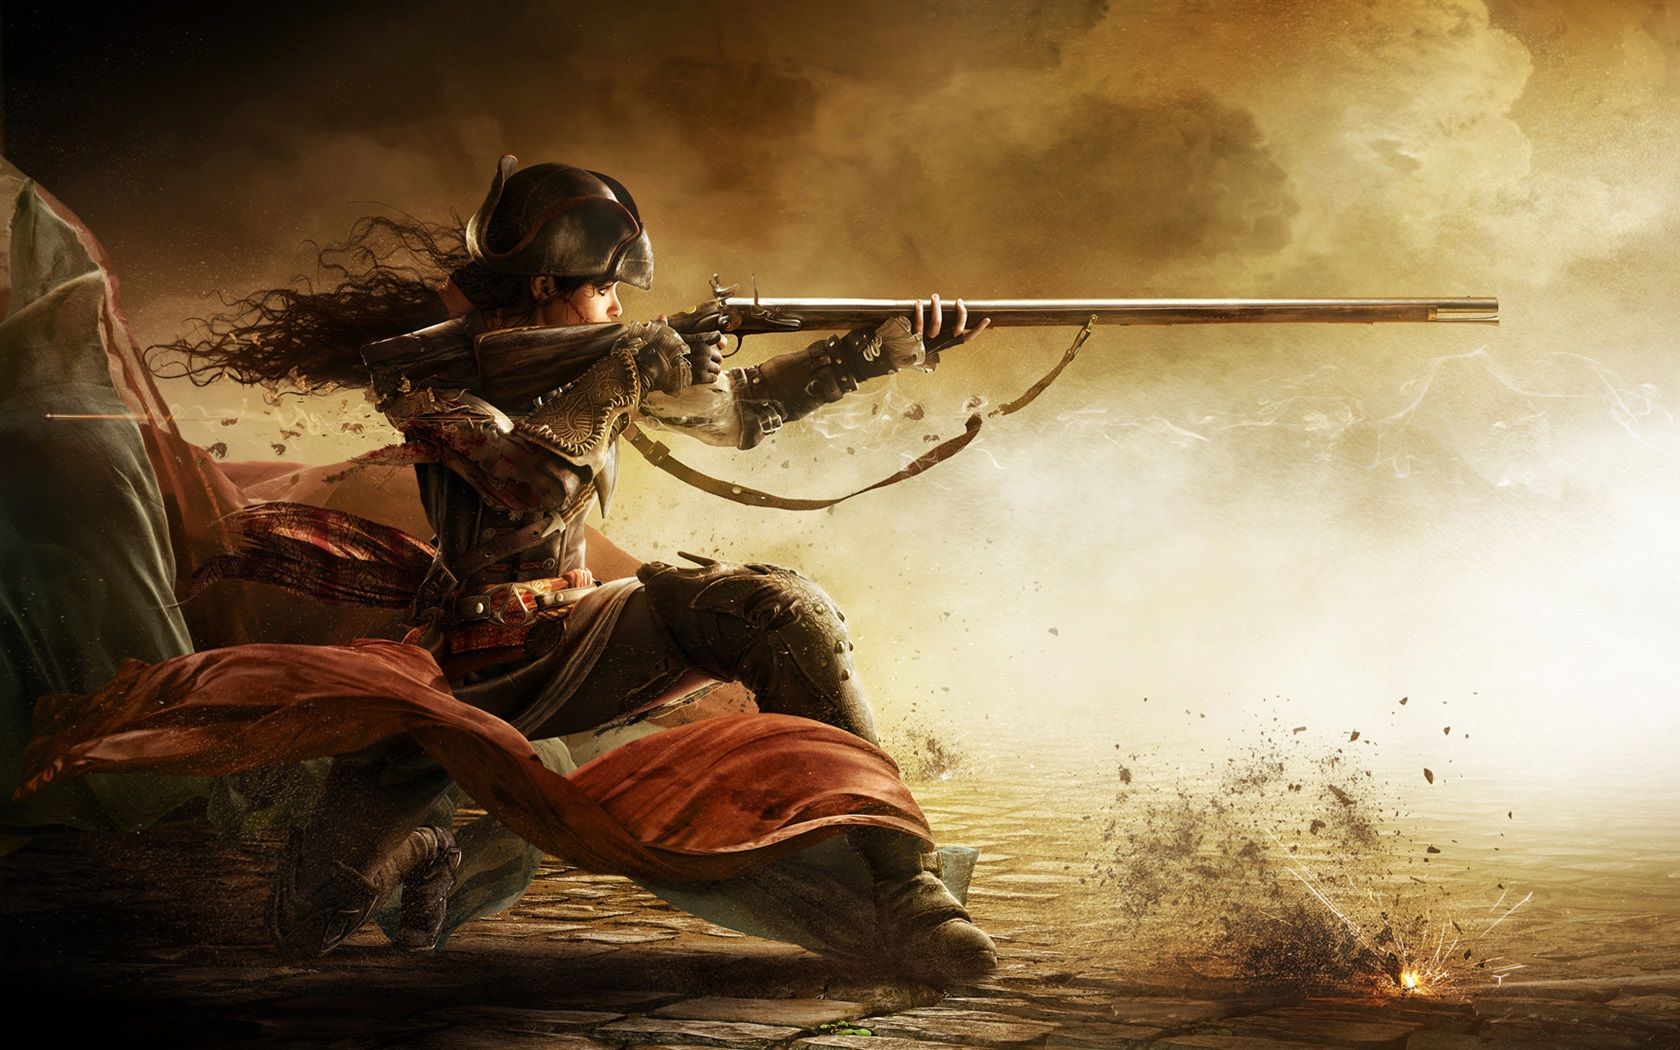 Wallpaper Assassin's Creed III: Liberation, girl use rifle 1920x1080 Full HD 2K Picture, Image